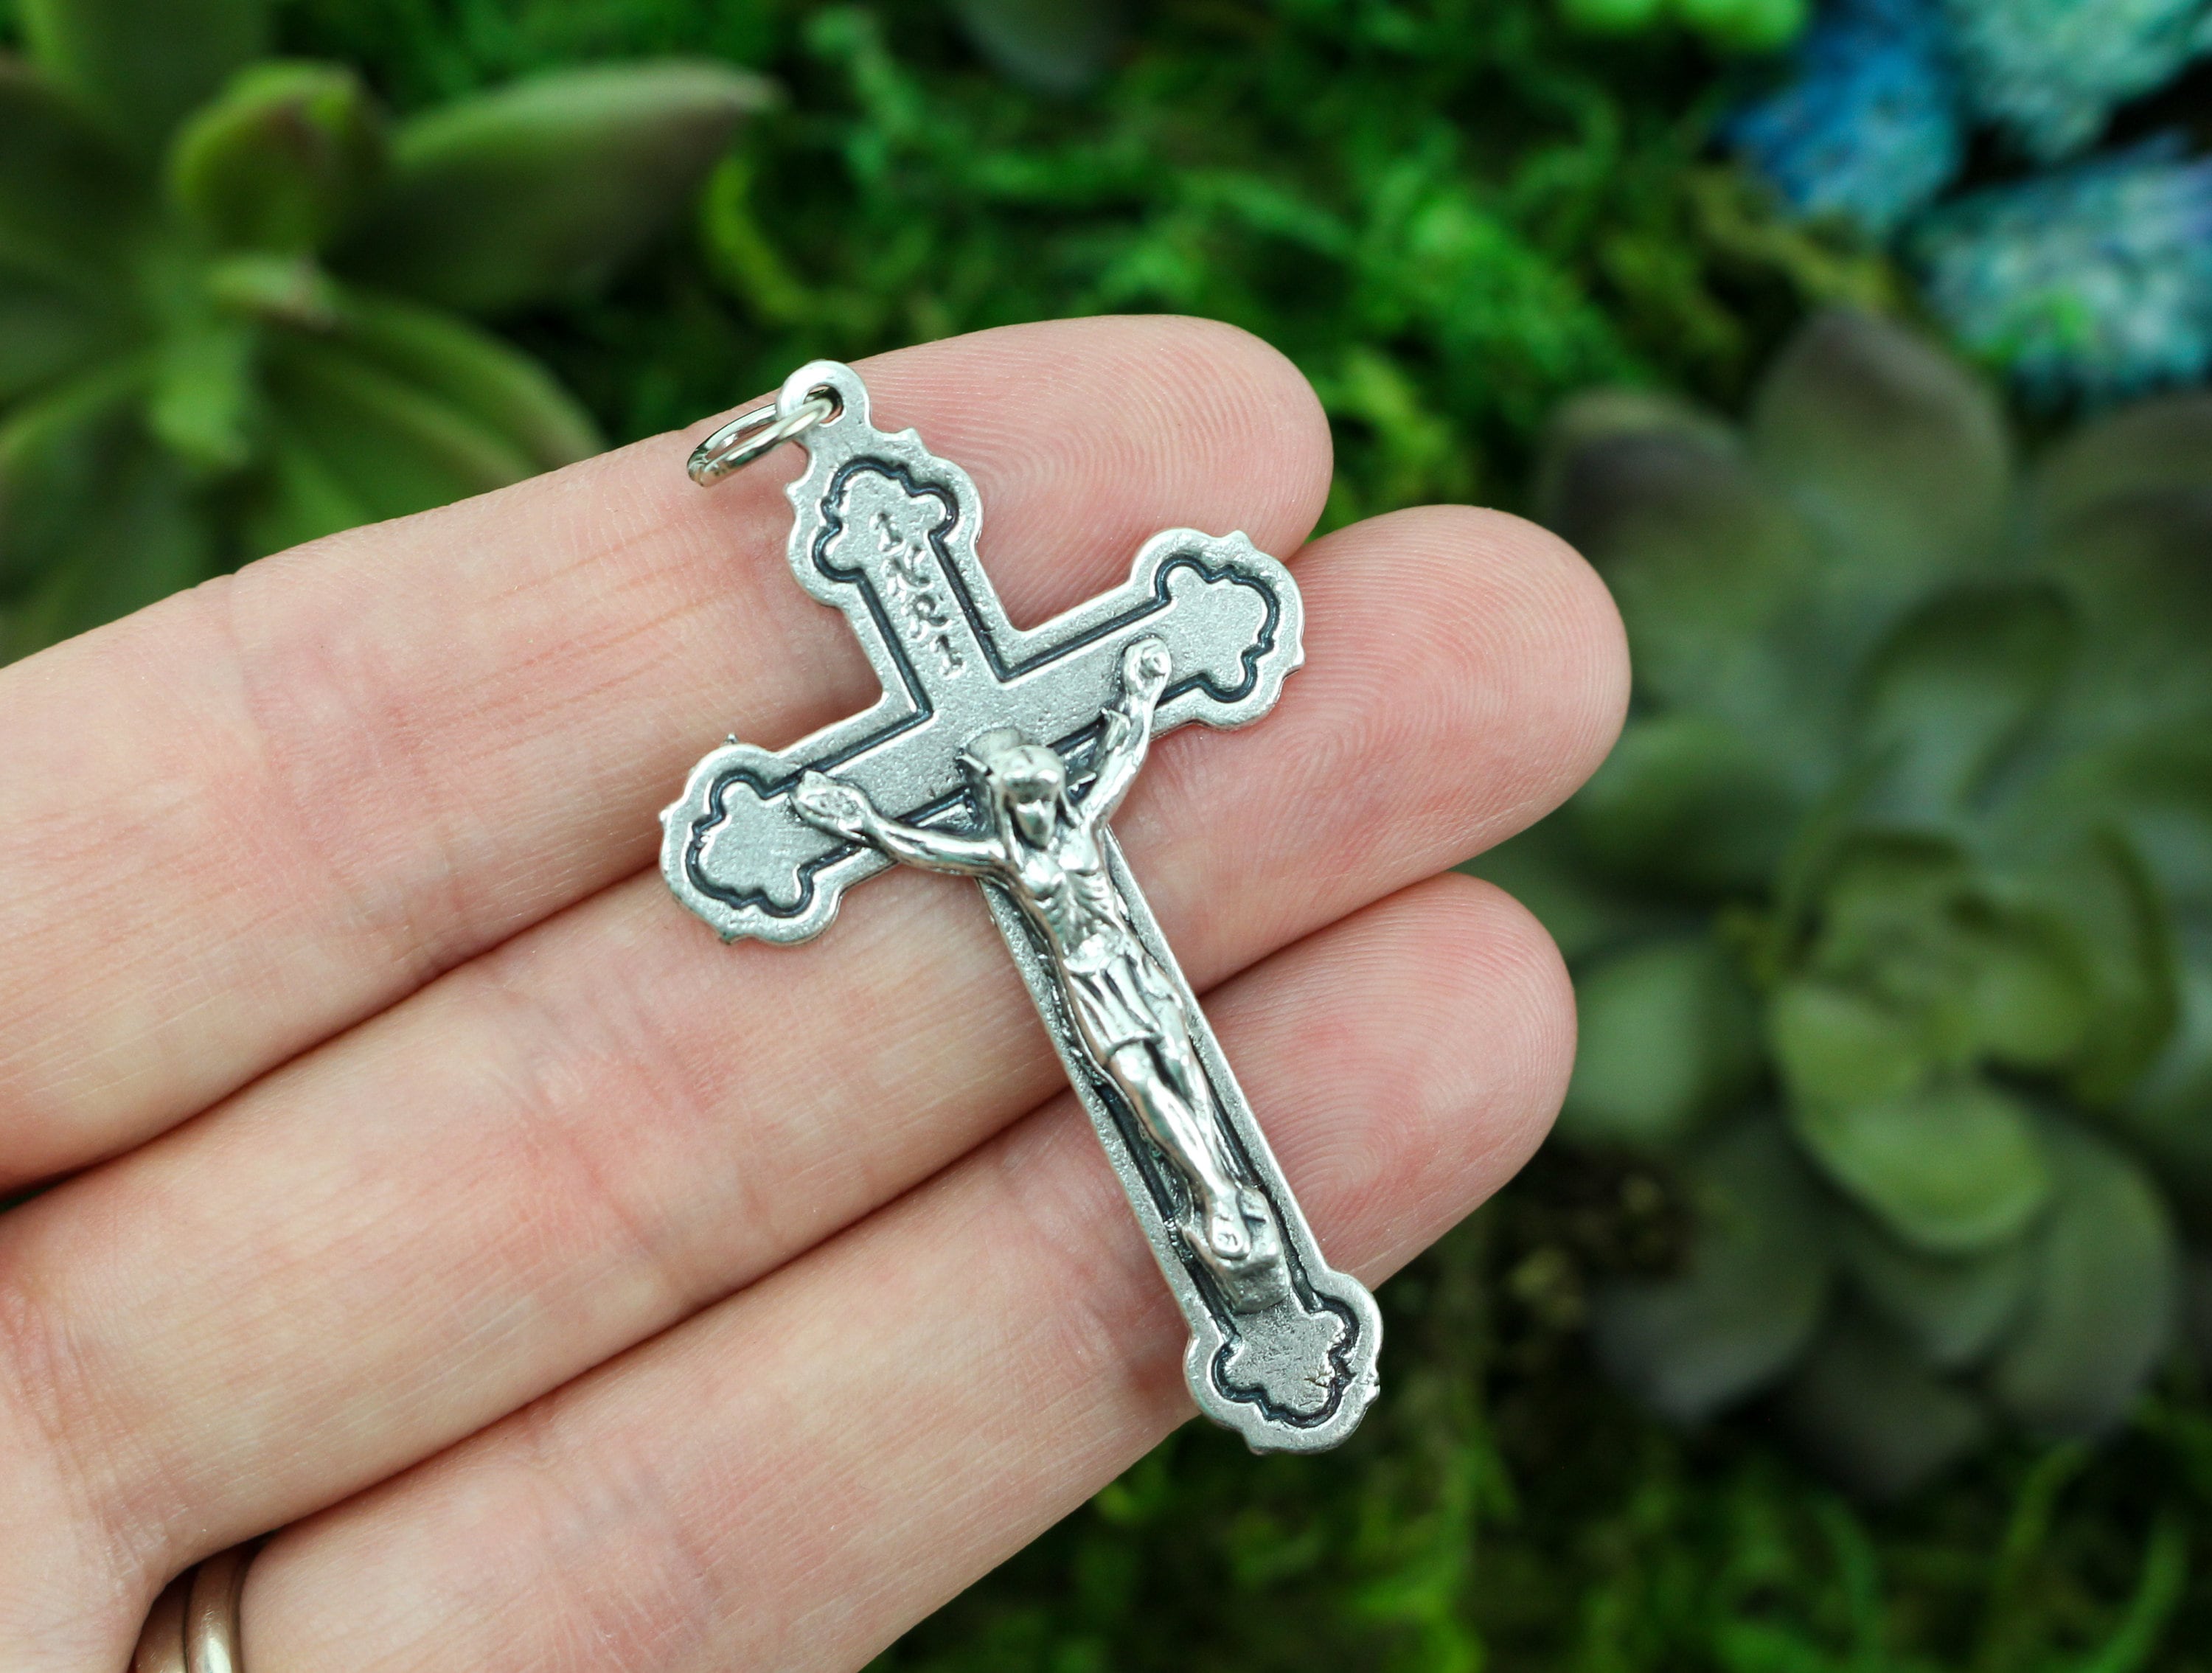 20pcs Pack Retro Silver Metal Alloy Hollow Rosary Cross Crucifix Pendant Charms